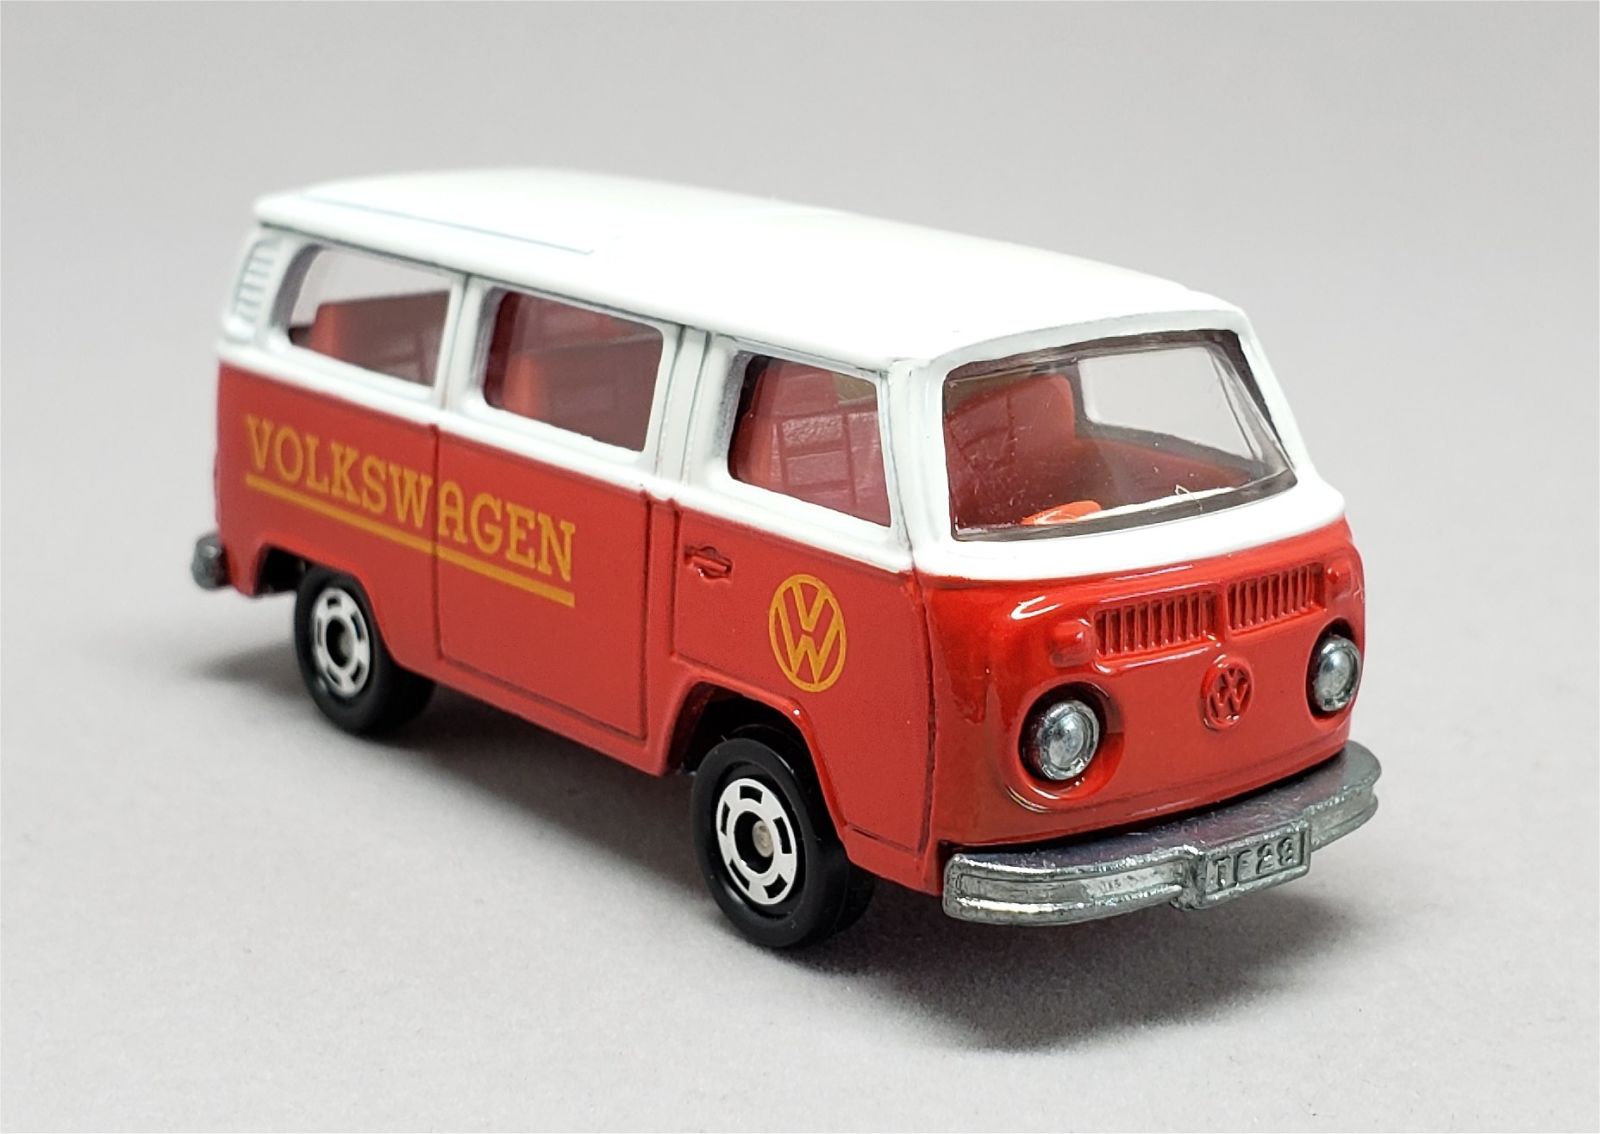 Illustration for article titled [REVIEW] Tomica Volkswagen Microbus